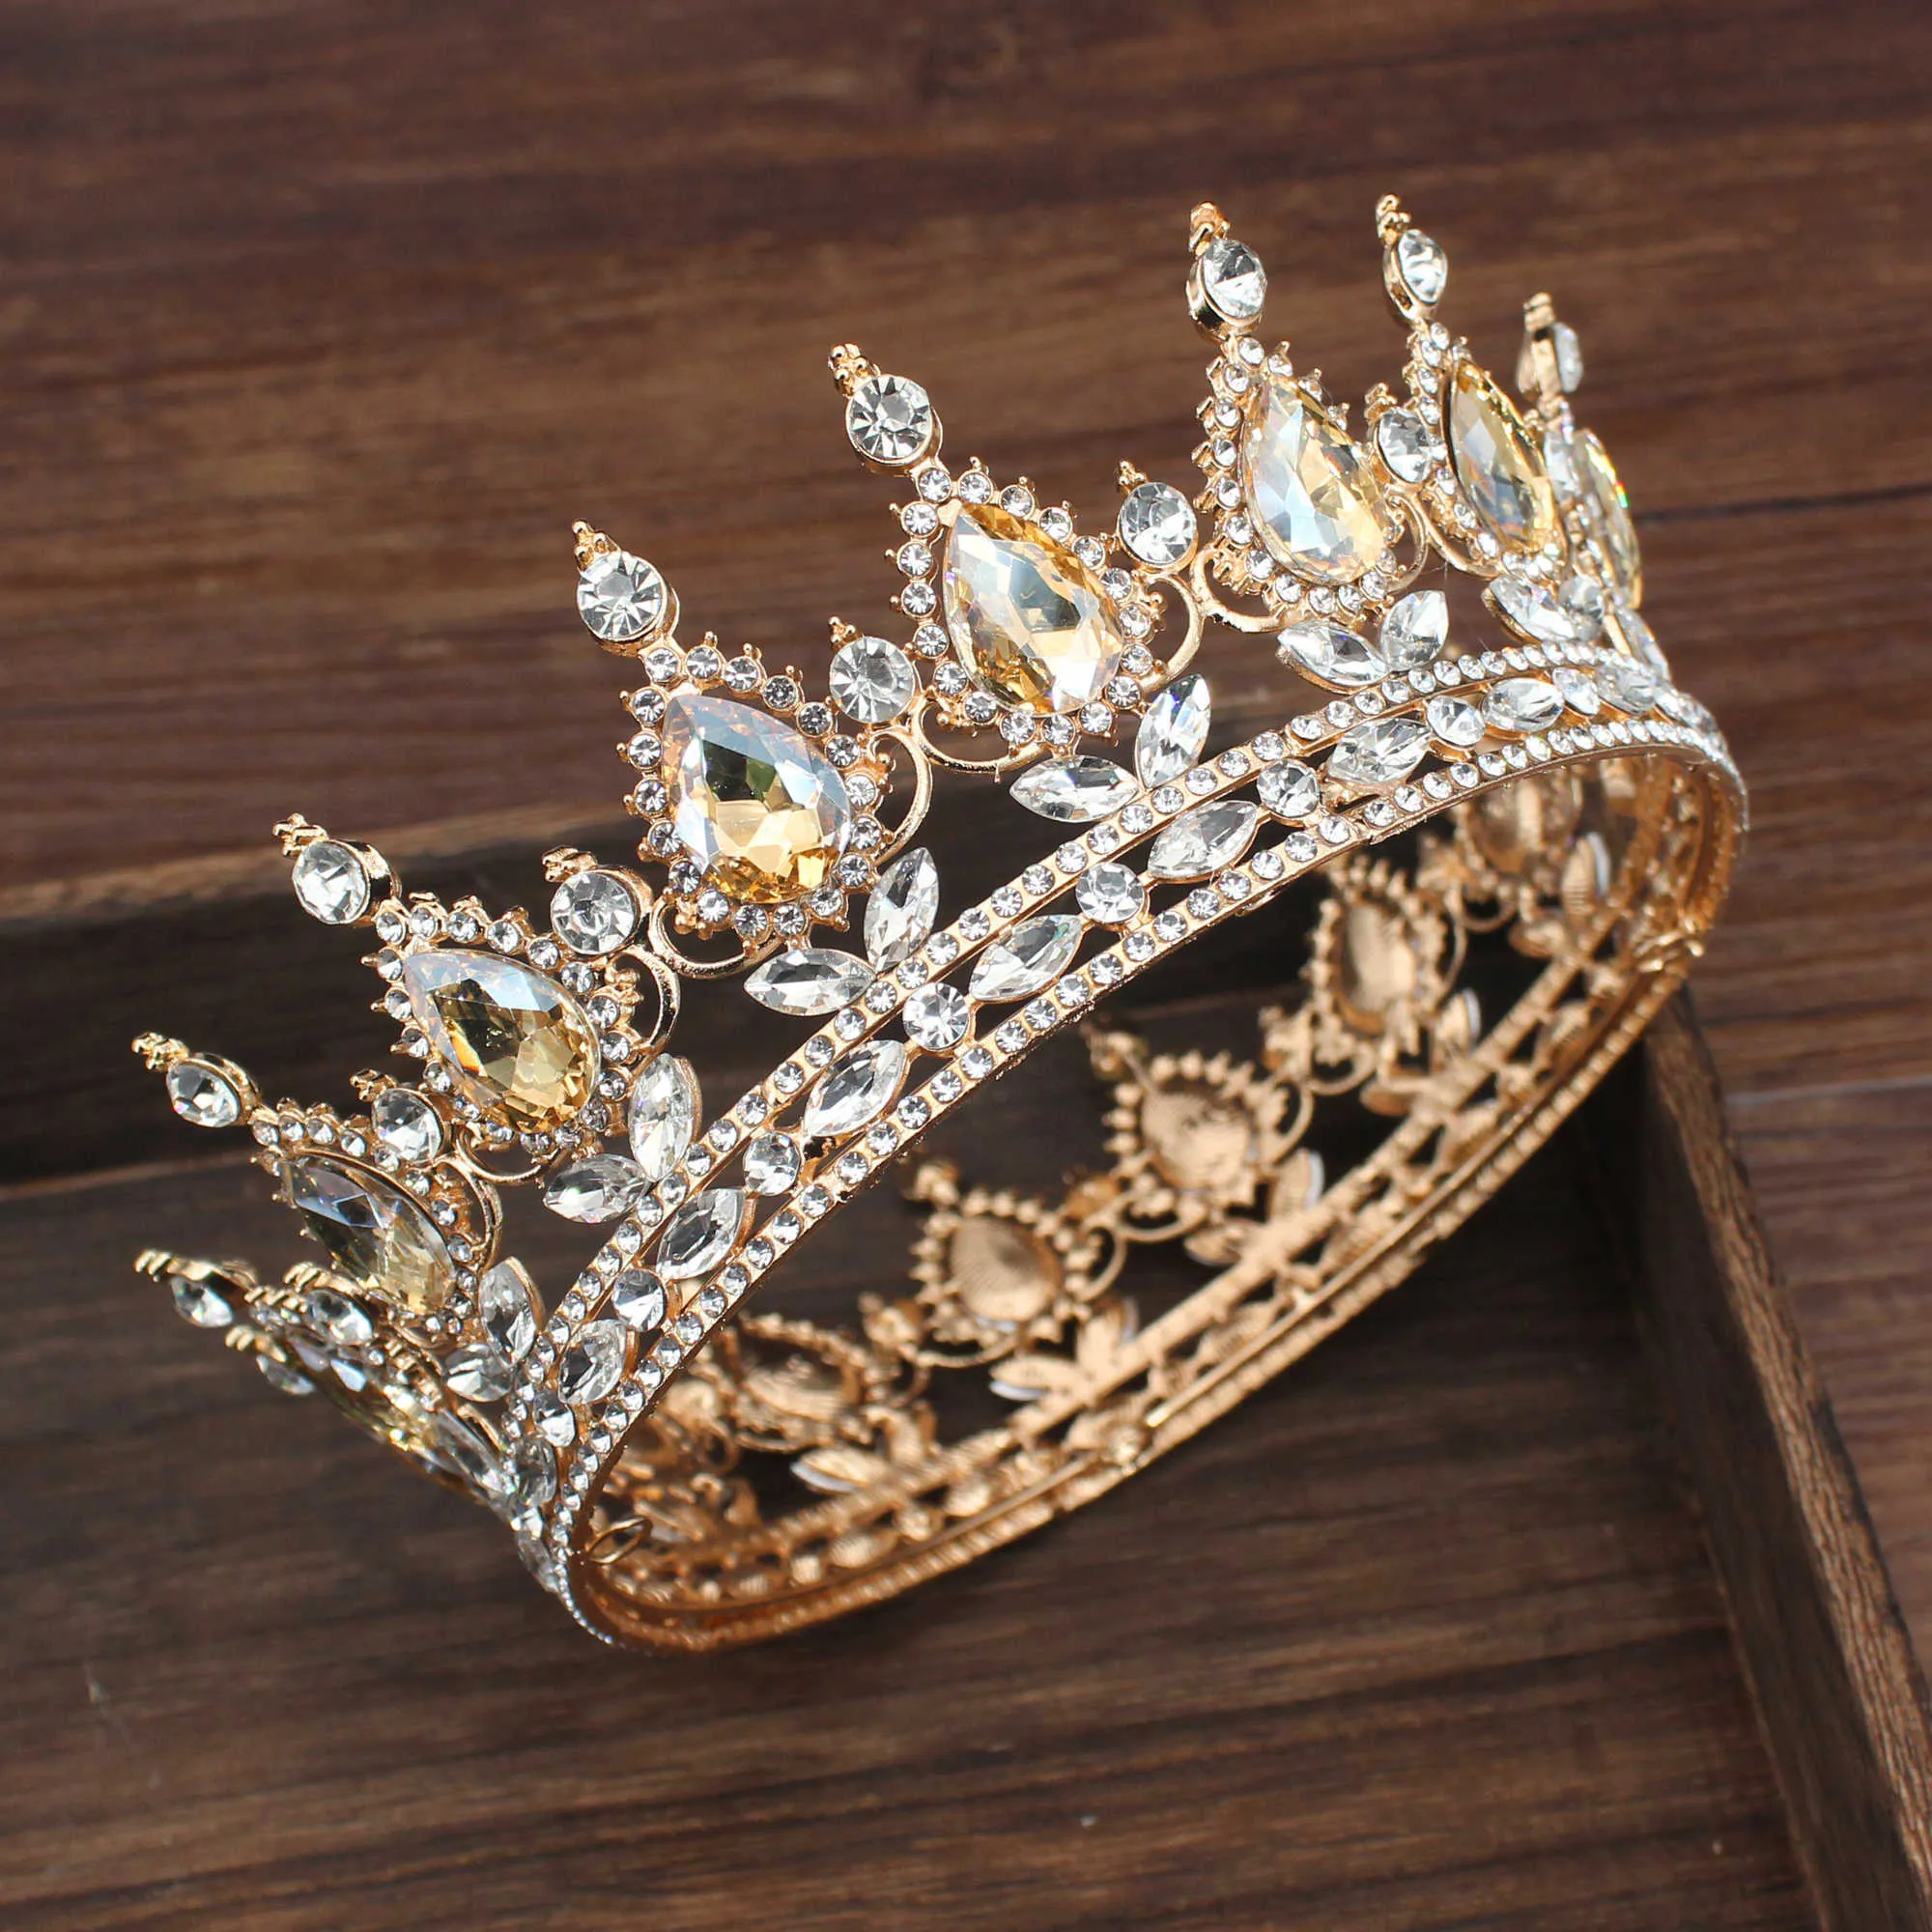 Tiaras Vintage Wedding Queen King Tiaras and Crowns Bridal Head Jewelry Accessories Women diadem Pageant Headpiece Bride Hair Ornament Z0220